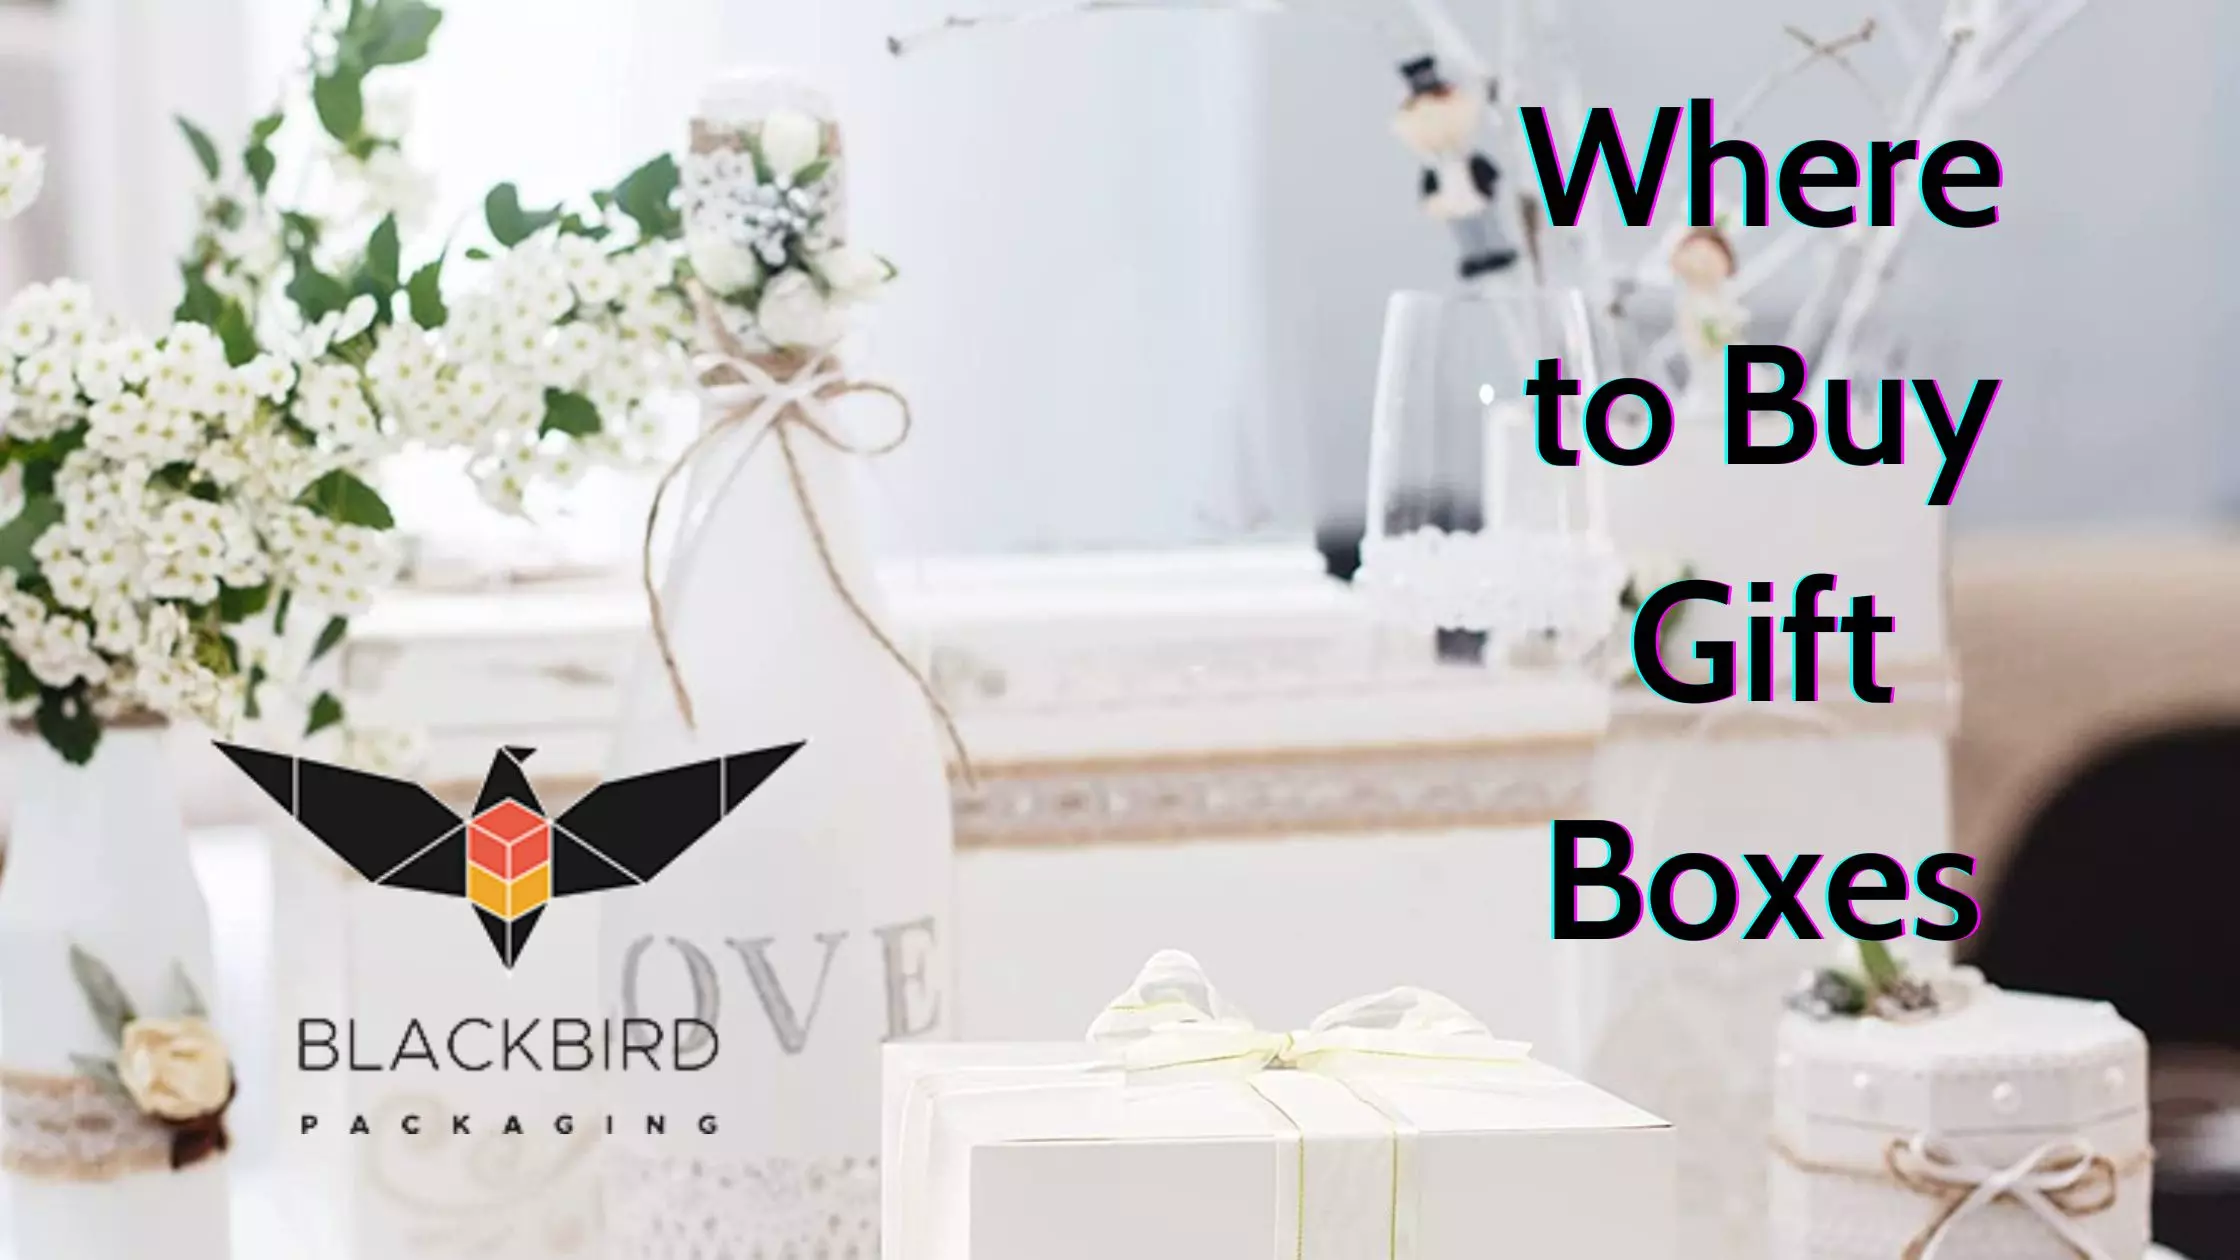 Where to Buy Gift Boxes